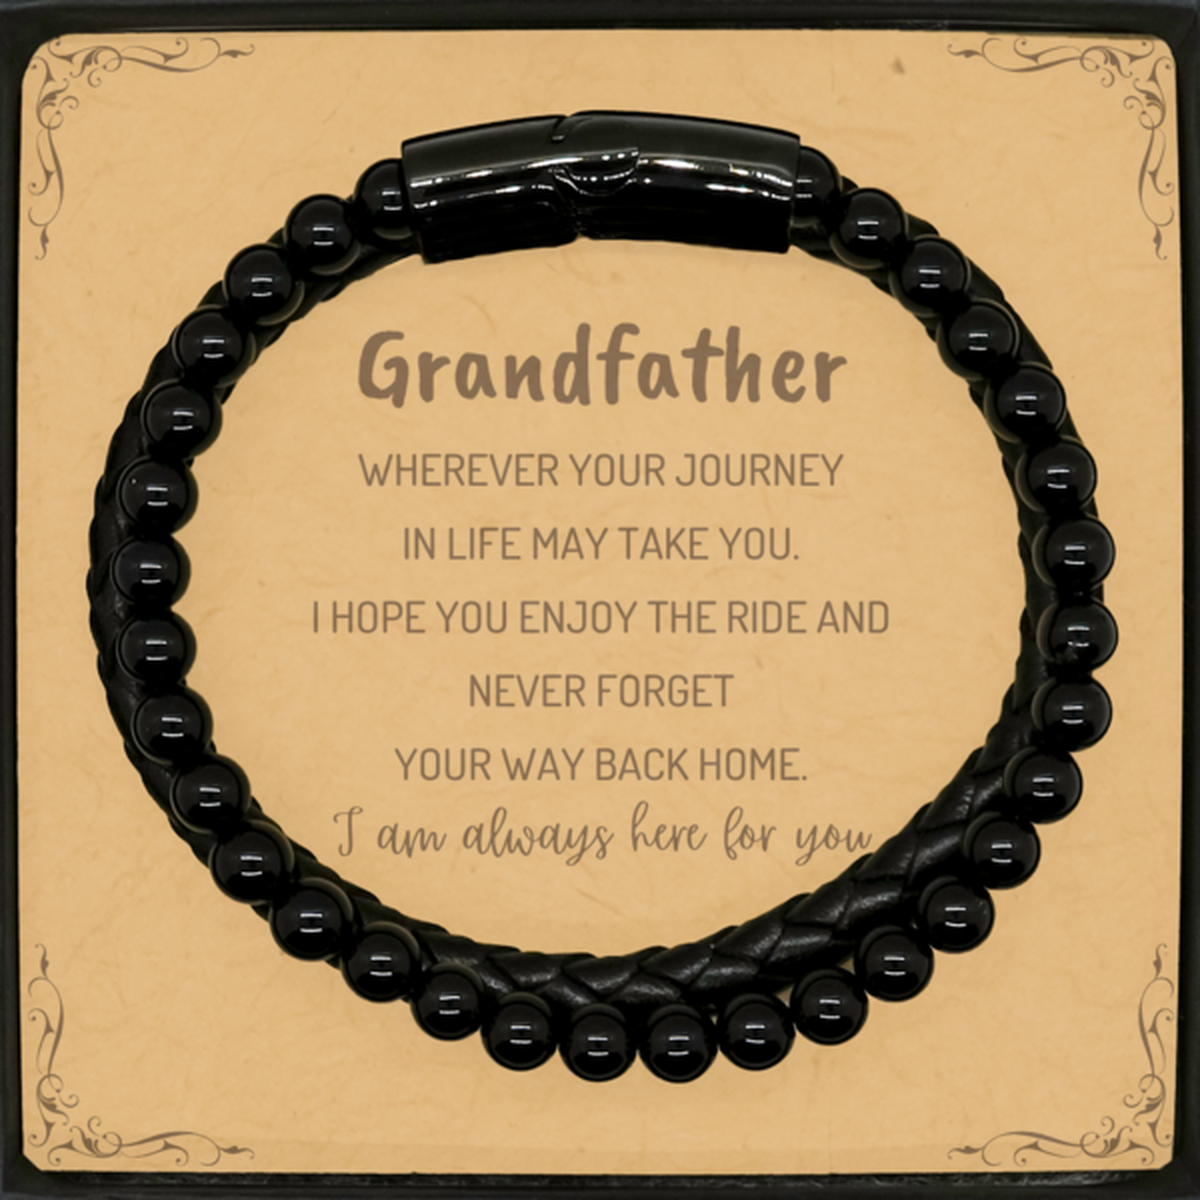 Grandfather wherever your journey in life may take you, I am always here for you Grandfather Stone Leather Bracelets, Awesome Christmas Gifts For Grandfather Message Card, Grandfather Birthday Gifts for Men Women Family Loved One